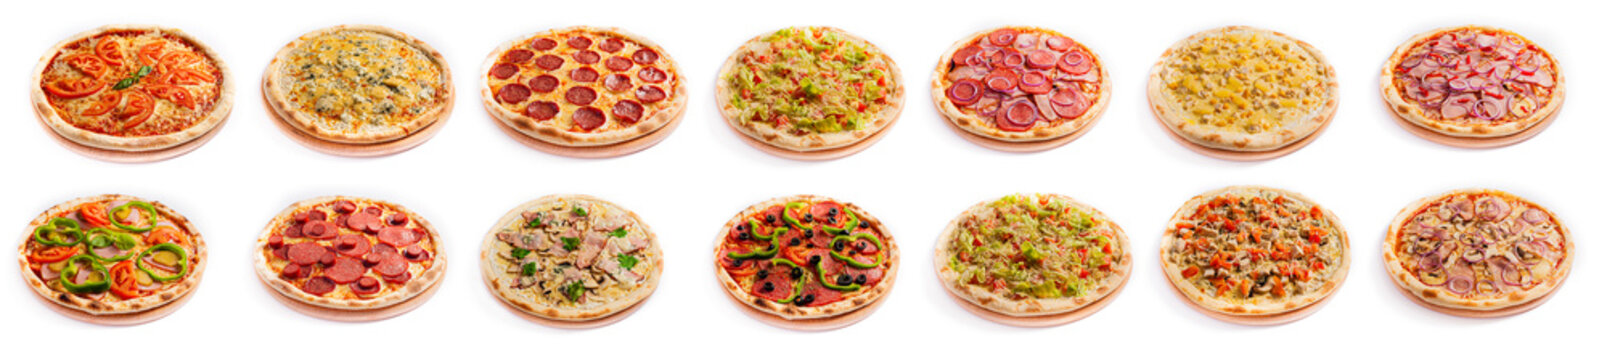 Set Of Pizza Isolated, Side View, On White Background. Pizza Photo For For Menu Card, Web Design, Site, Shop, Advertising Or Delivery Fast Food.